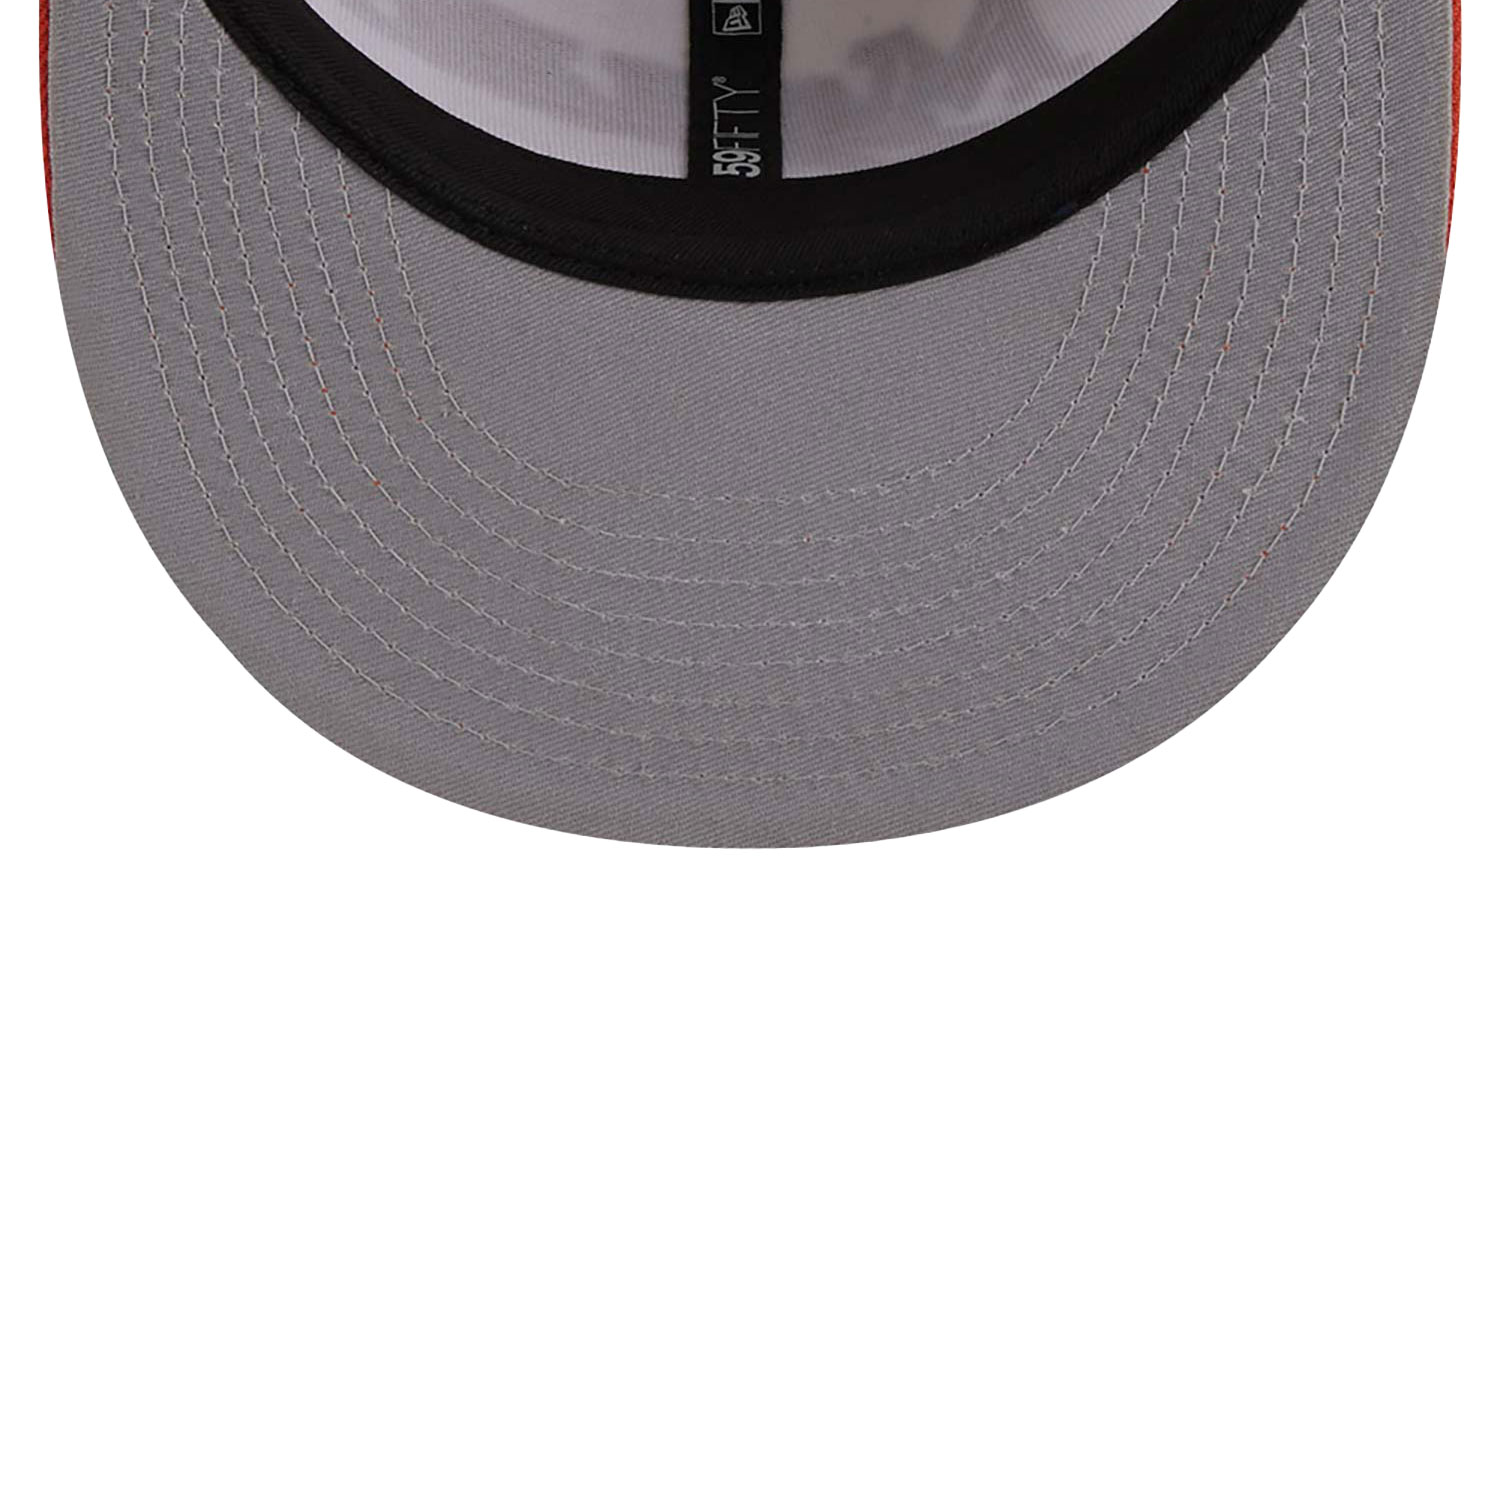 Miami Marlins Repreve Chrome White 59FIFTY Fitted Cap